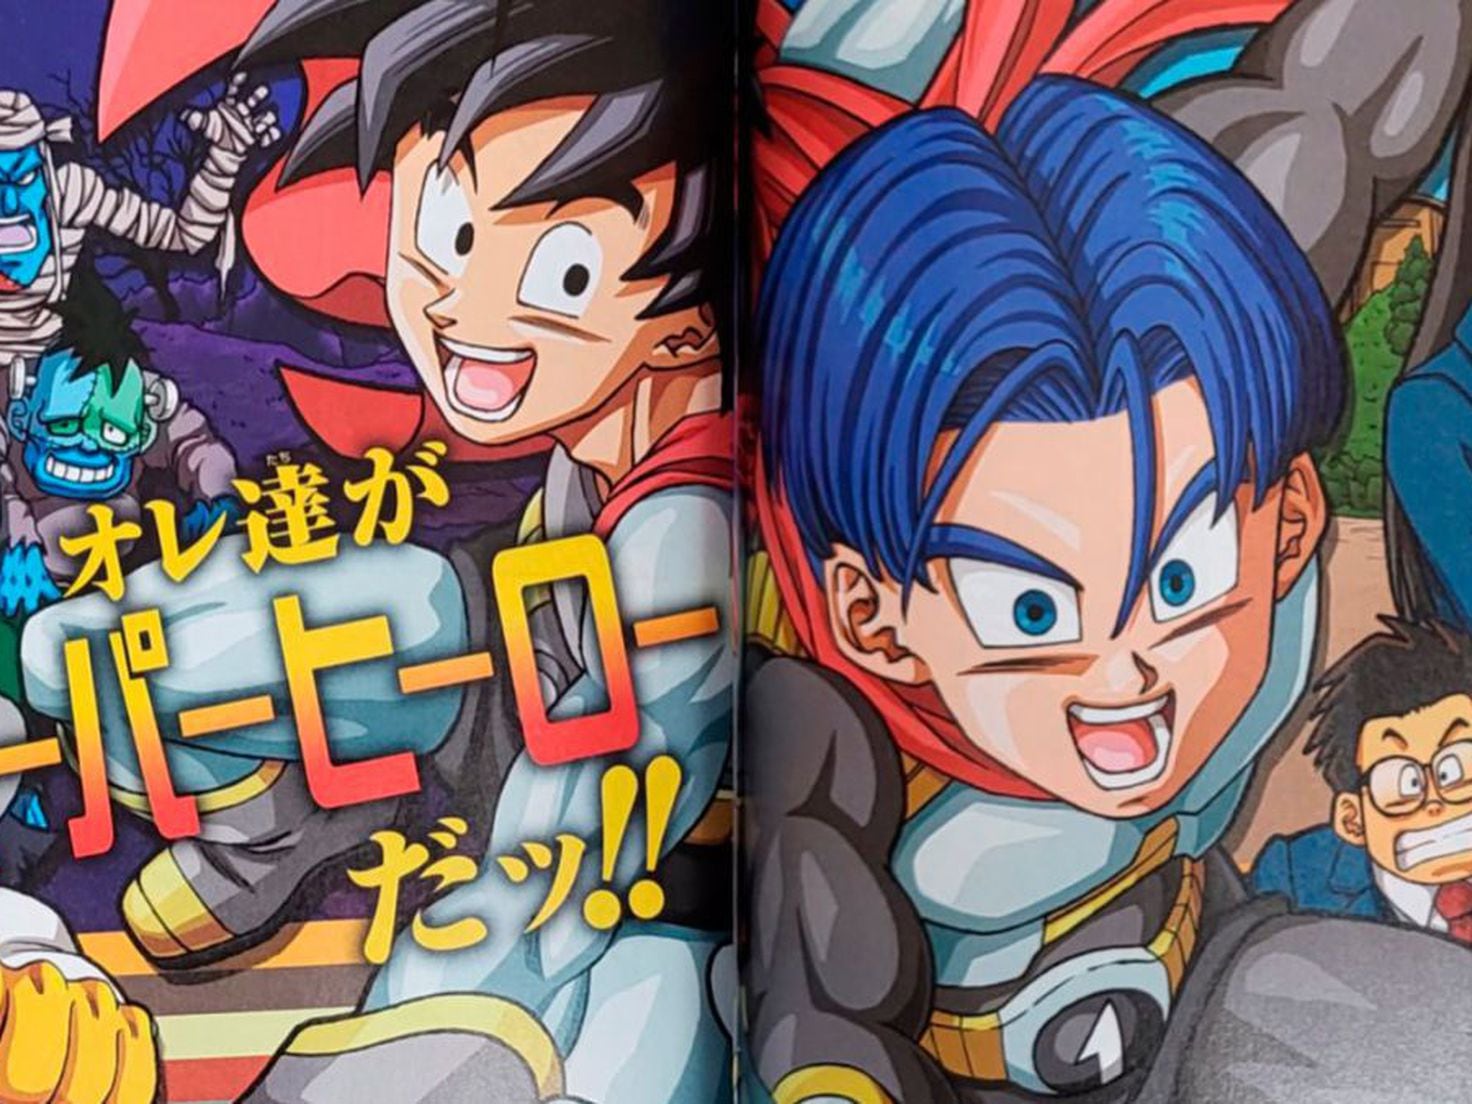 Dragon Ball Super Chapter 88 will be out in October, everything